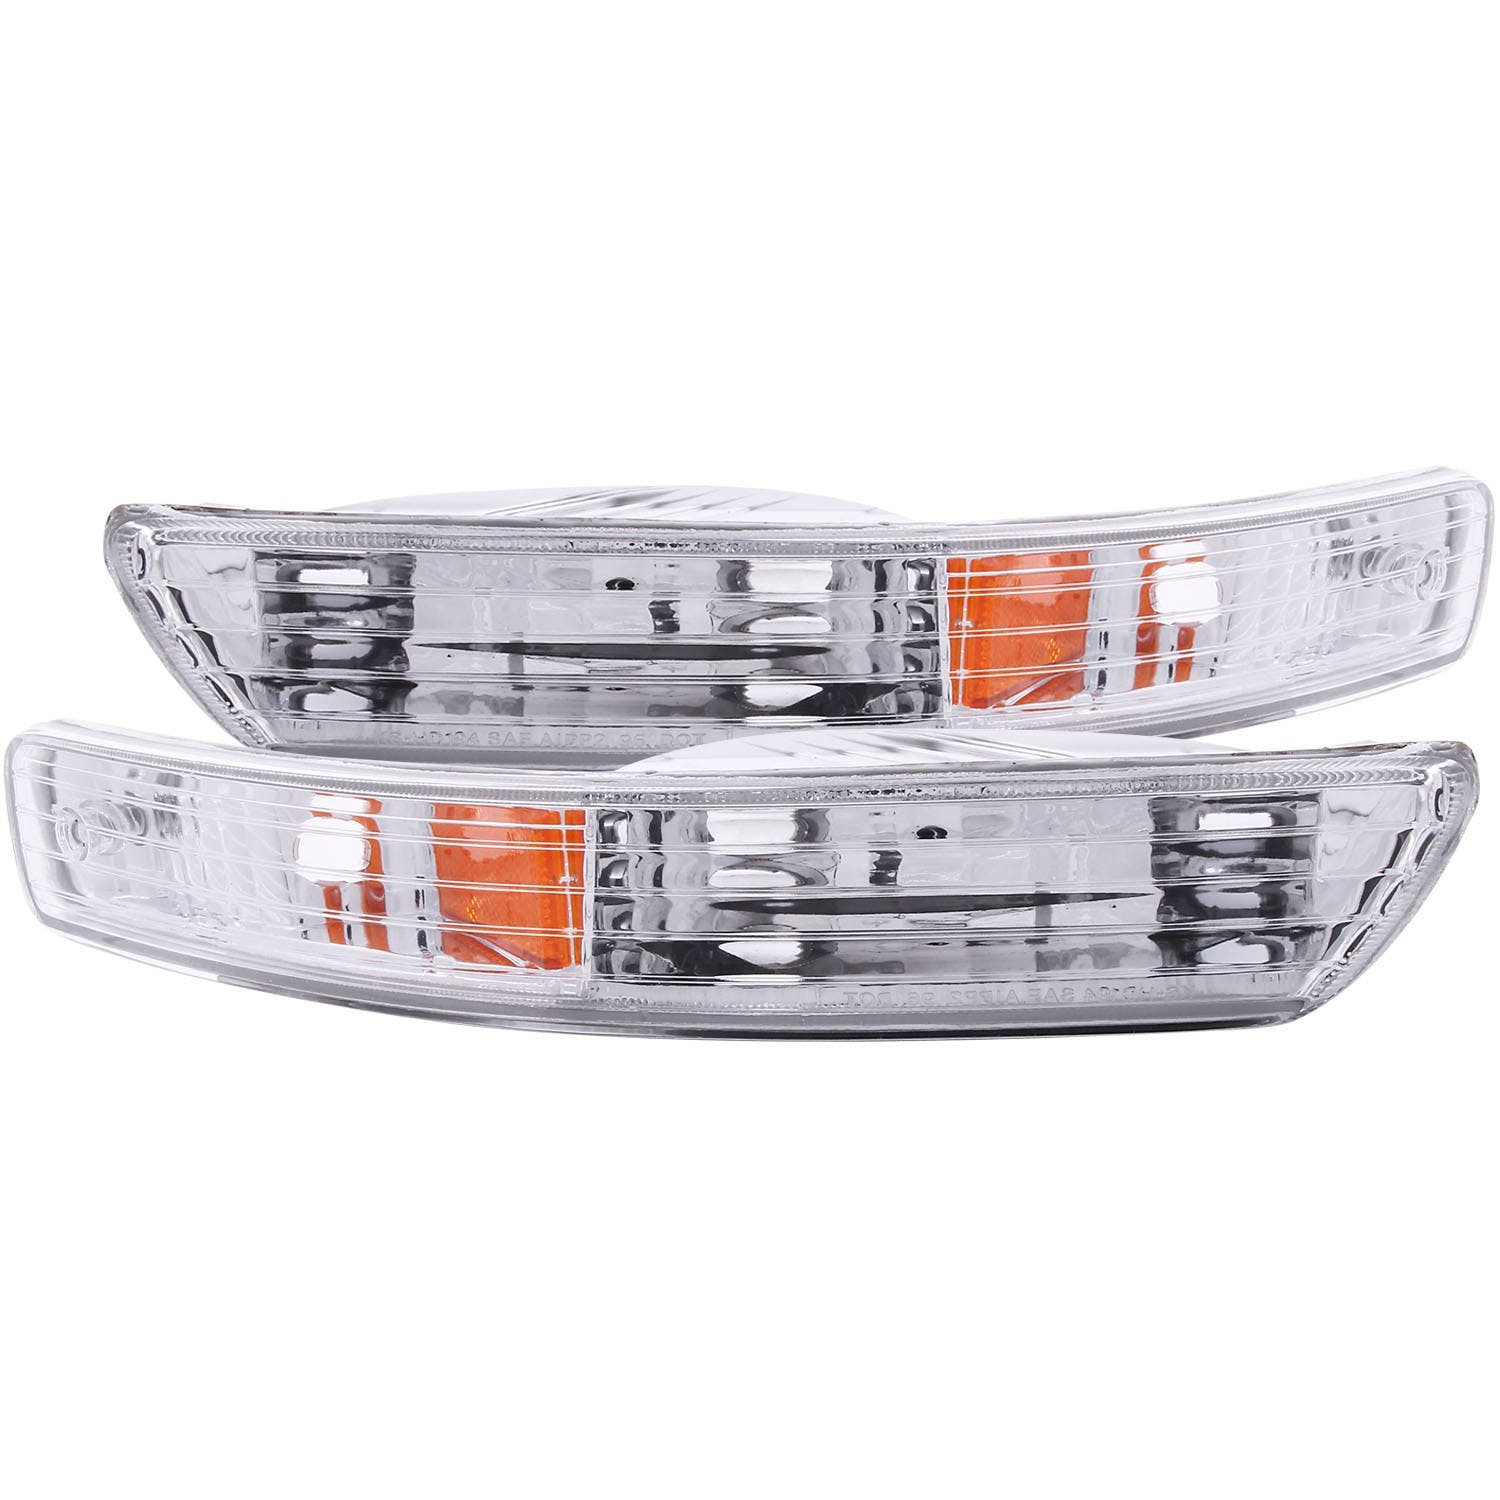 AnzoUSA 511021 Euro Parking Lights Chrome with Amber Reflector